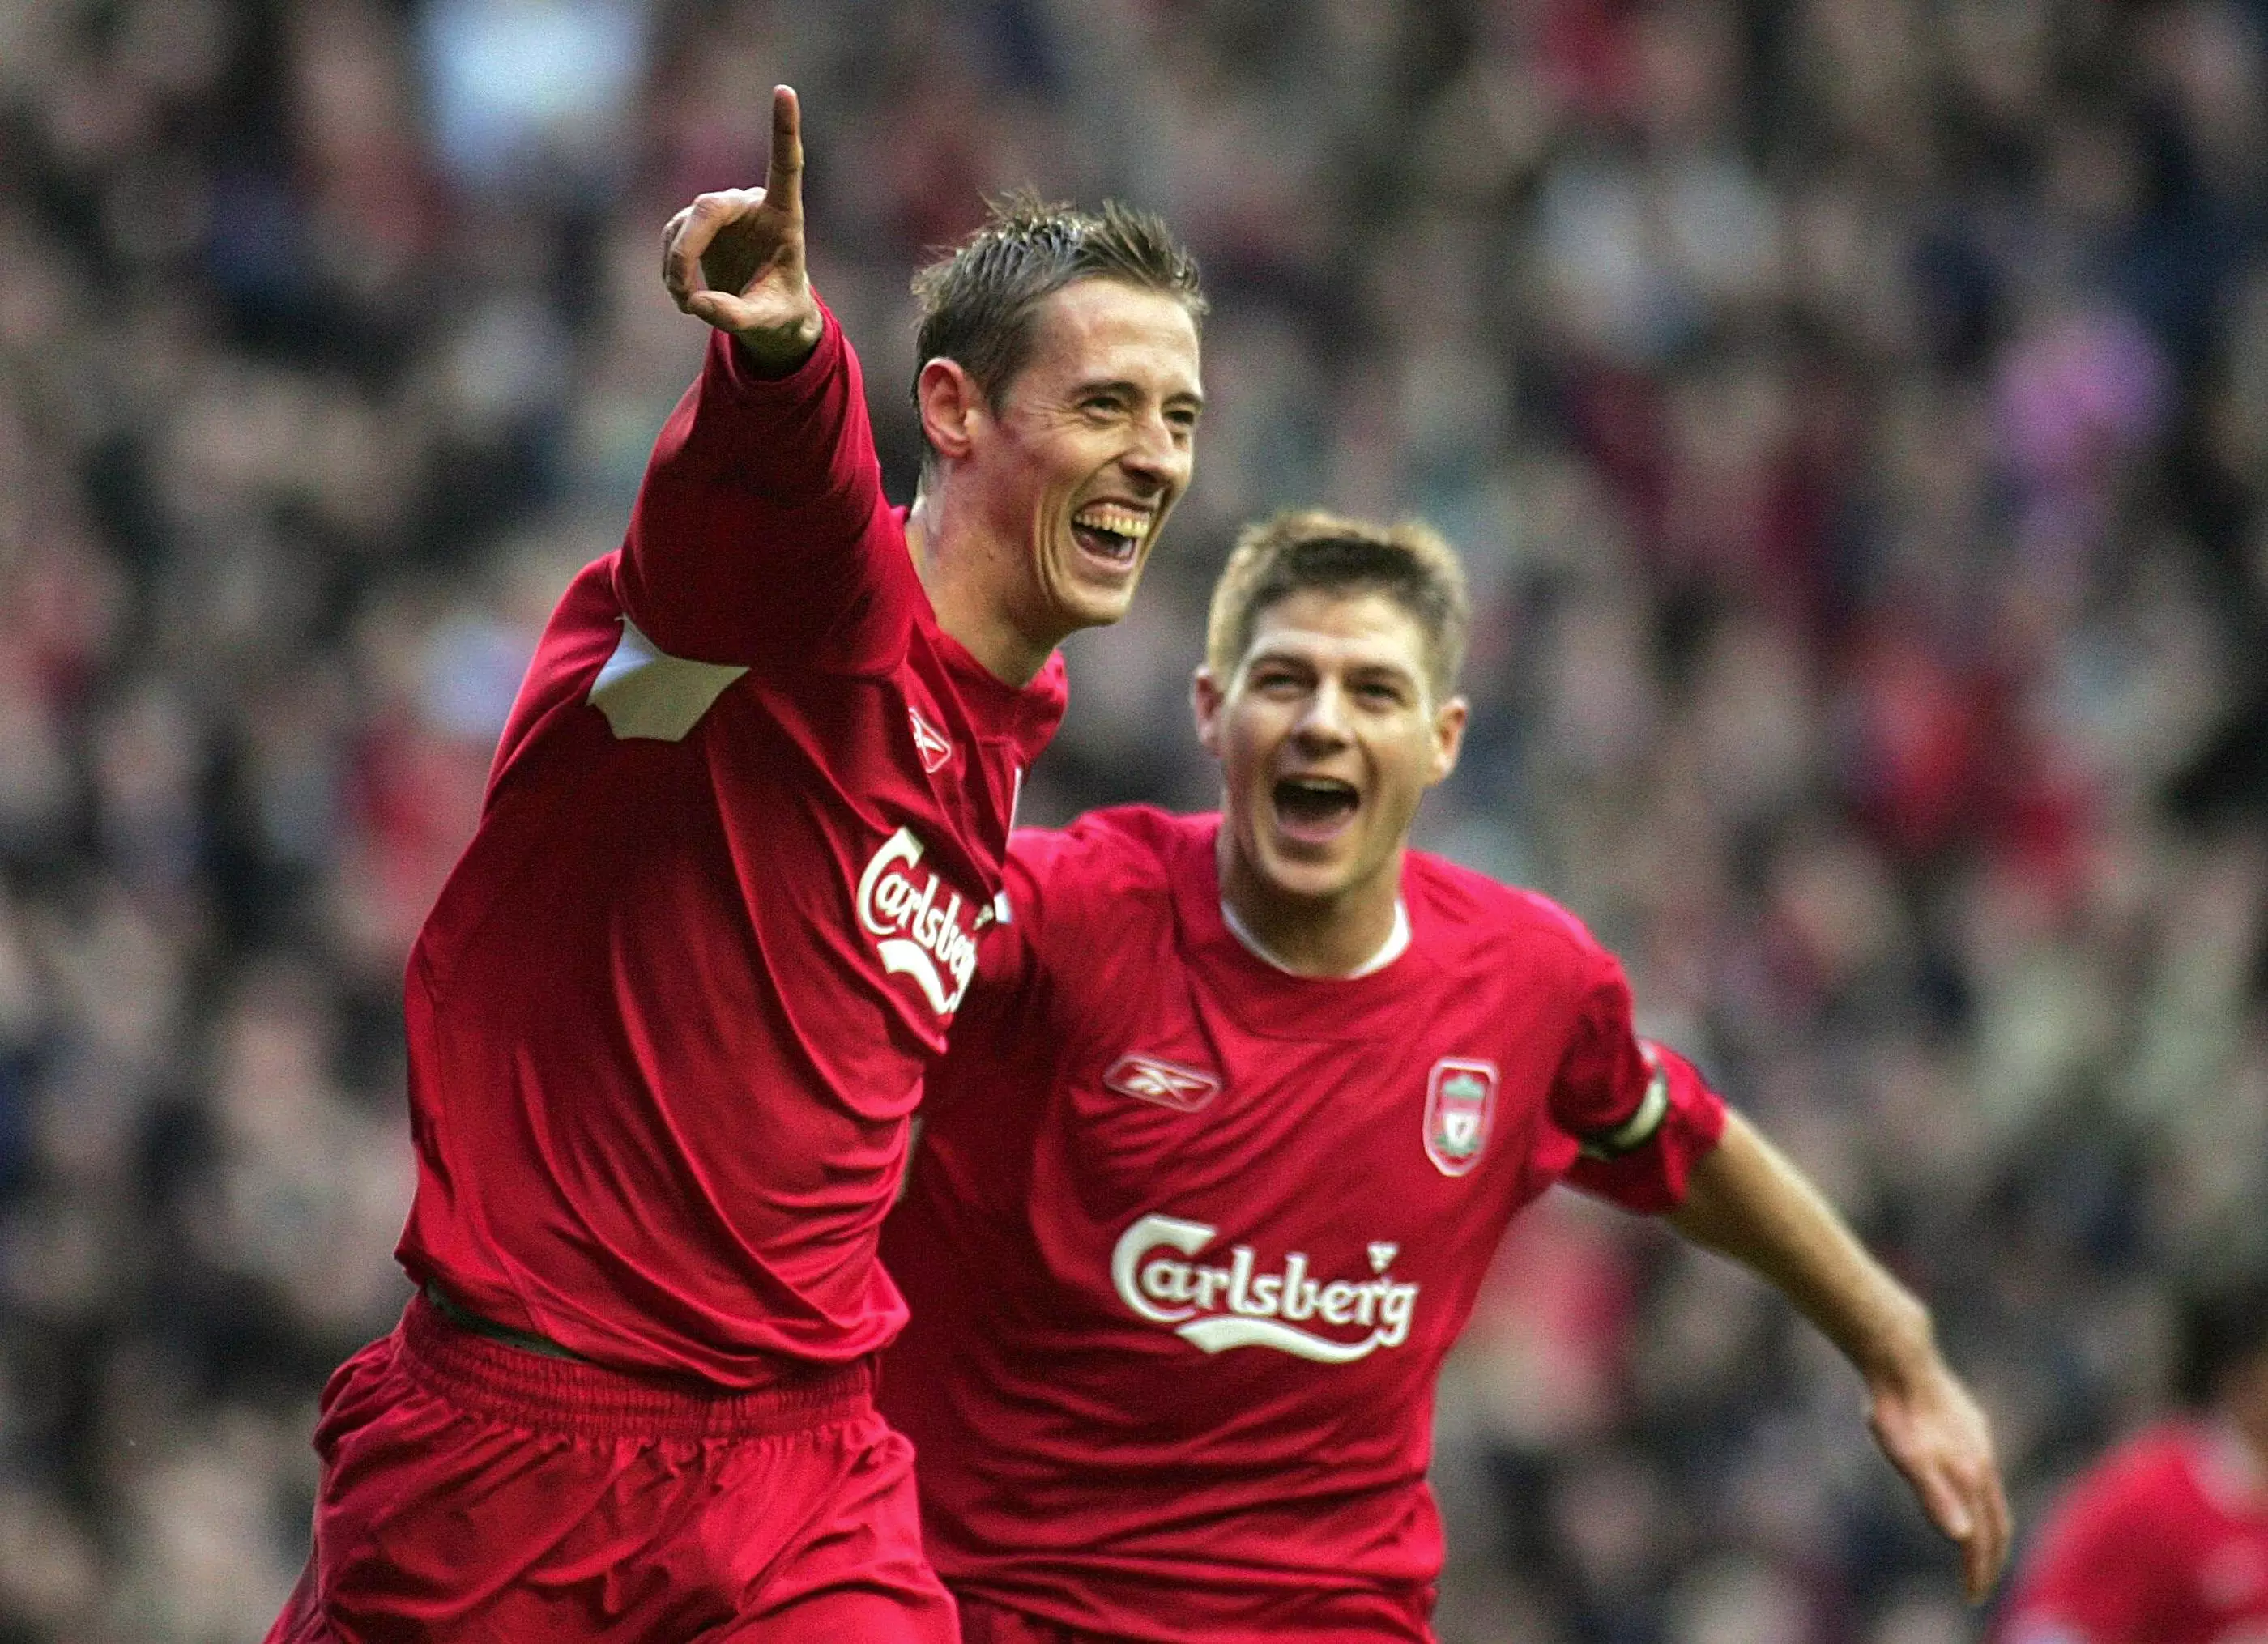 Peter Crouch struck up a special relationship with Steven Gerrard during his three years at Liverpool